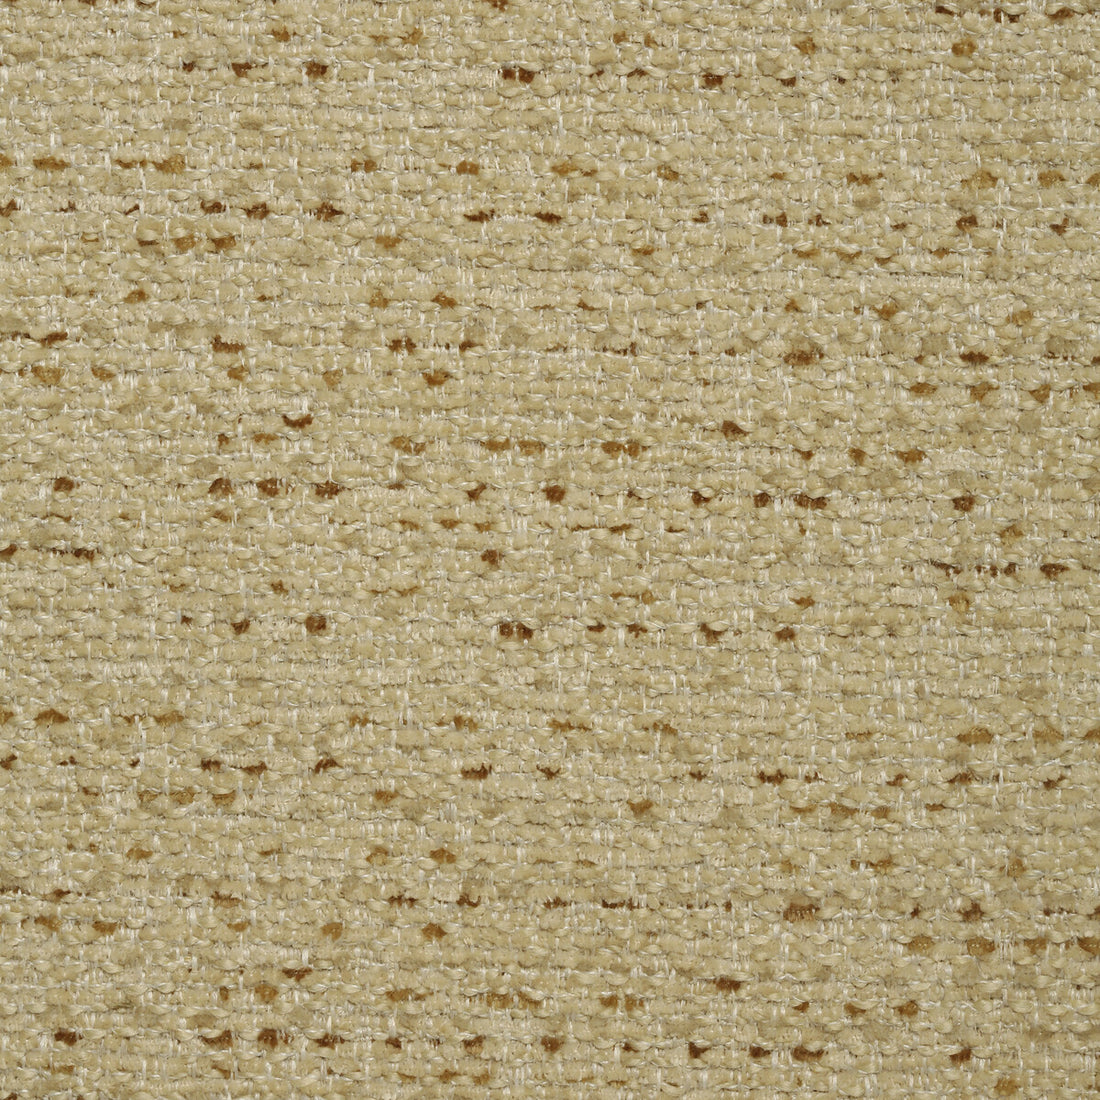 Kravet Smart fabric in 35117-116 color - pattern 35117.116.0 - by Kravet Smart in the Performance Crypton Home collection